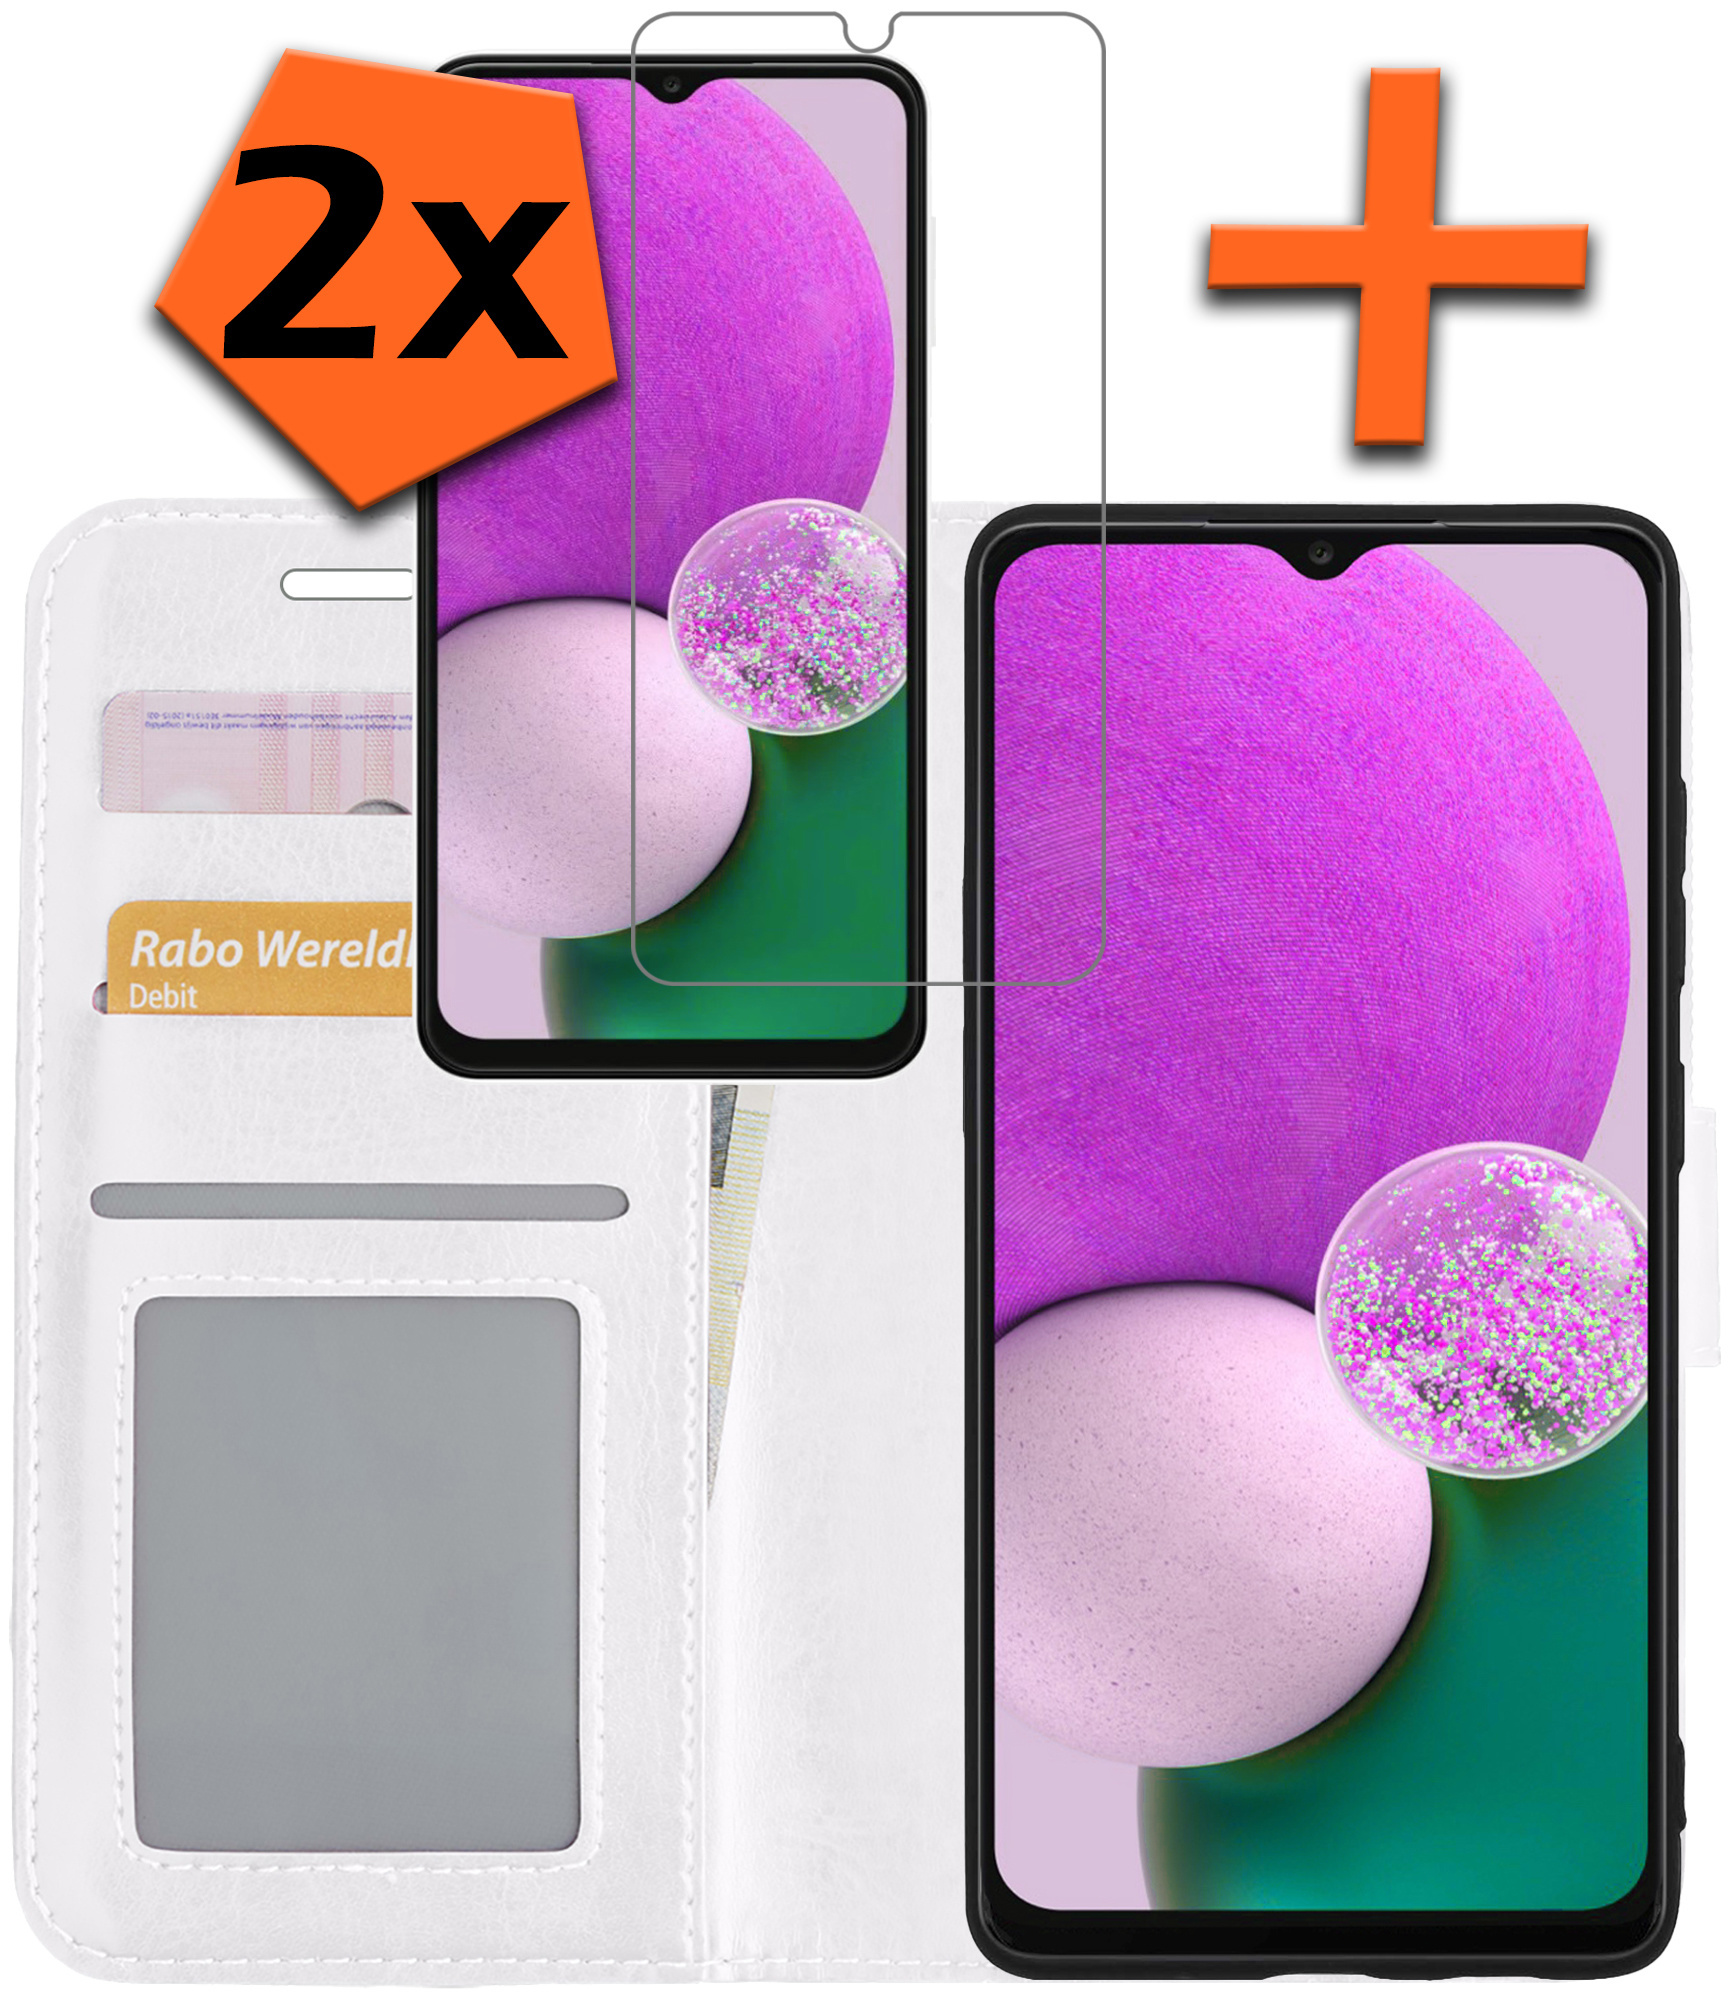 Nomfy Samsung Galaxy A13 5G Hoesje Bookcase Met 2x Screenprotector - Samsung Galaxy A13 5G Screenprotector 2x - Samsung Galaxy A13 5G Book Case Met 2x Screenprotector Wit